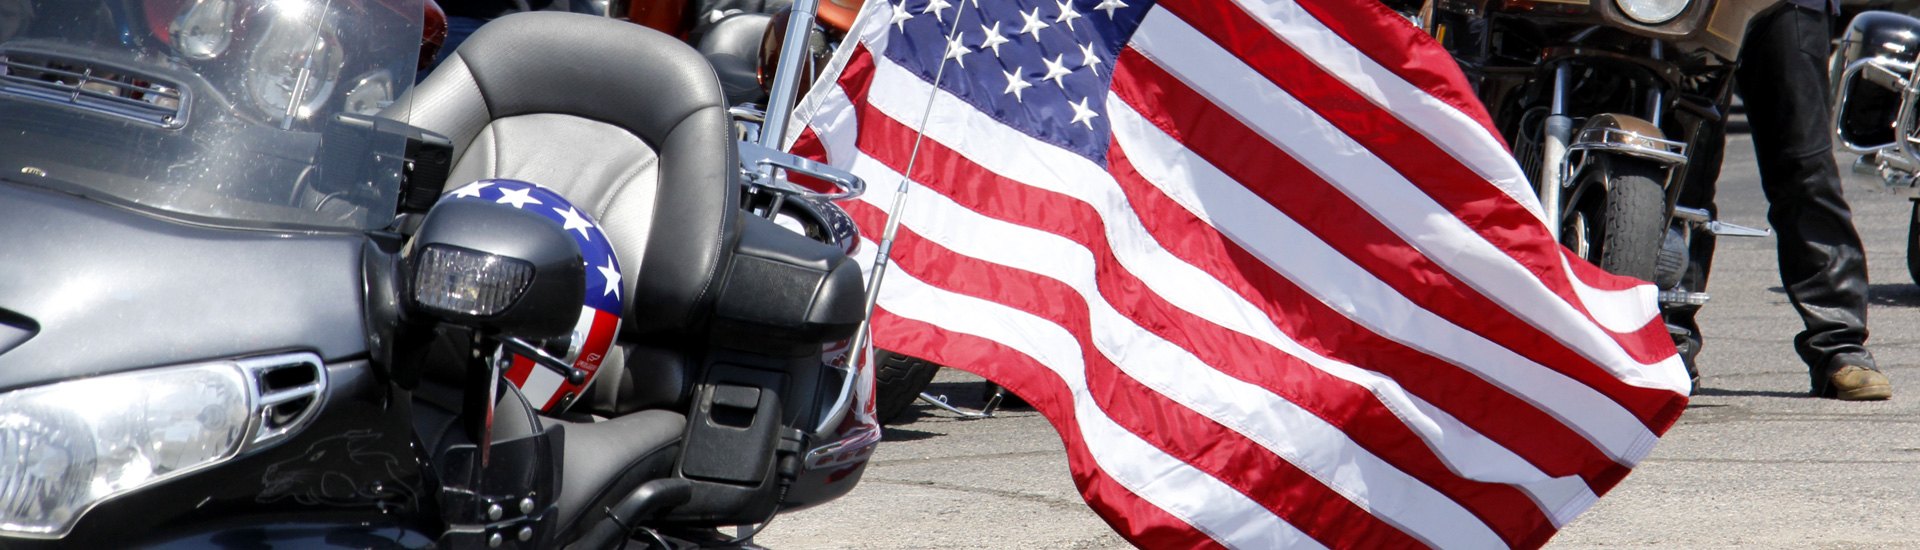 Motorcycle Flags, Banners & Signs